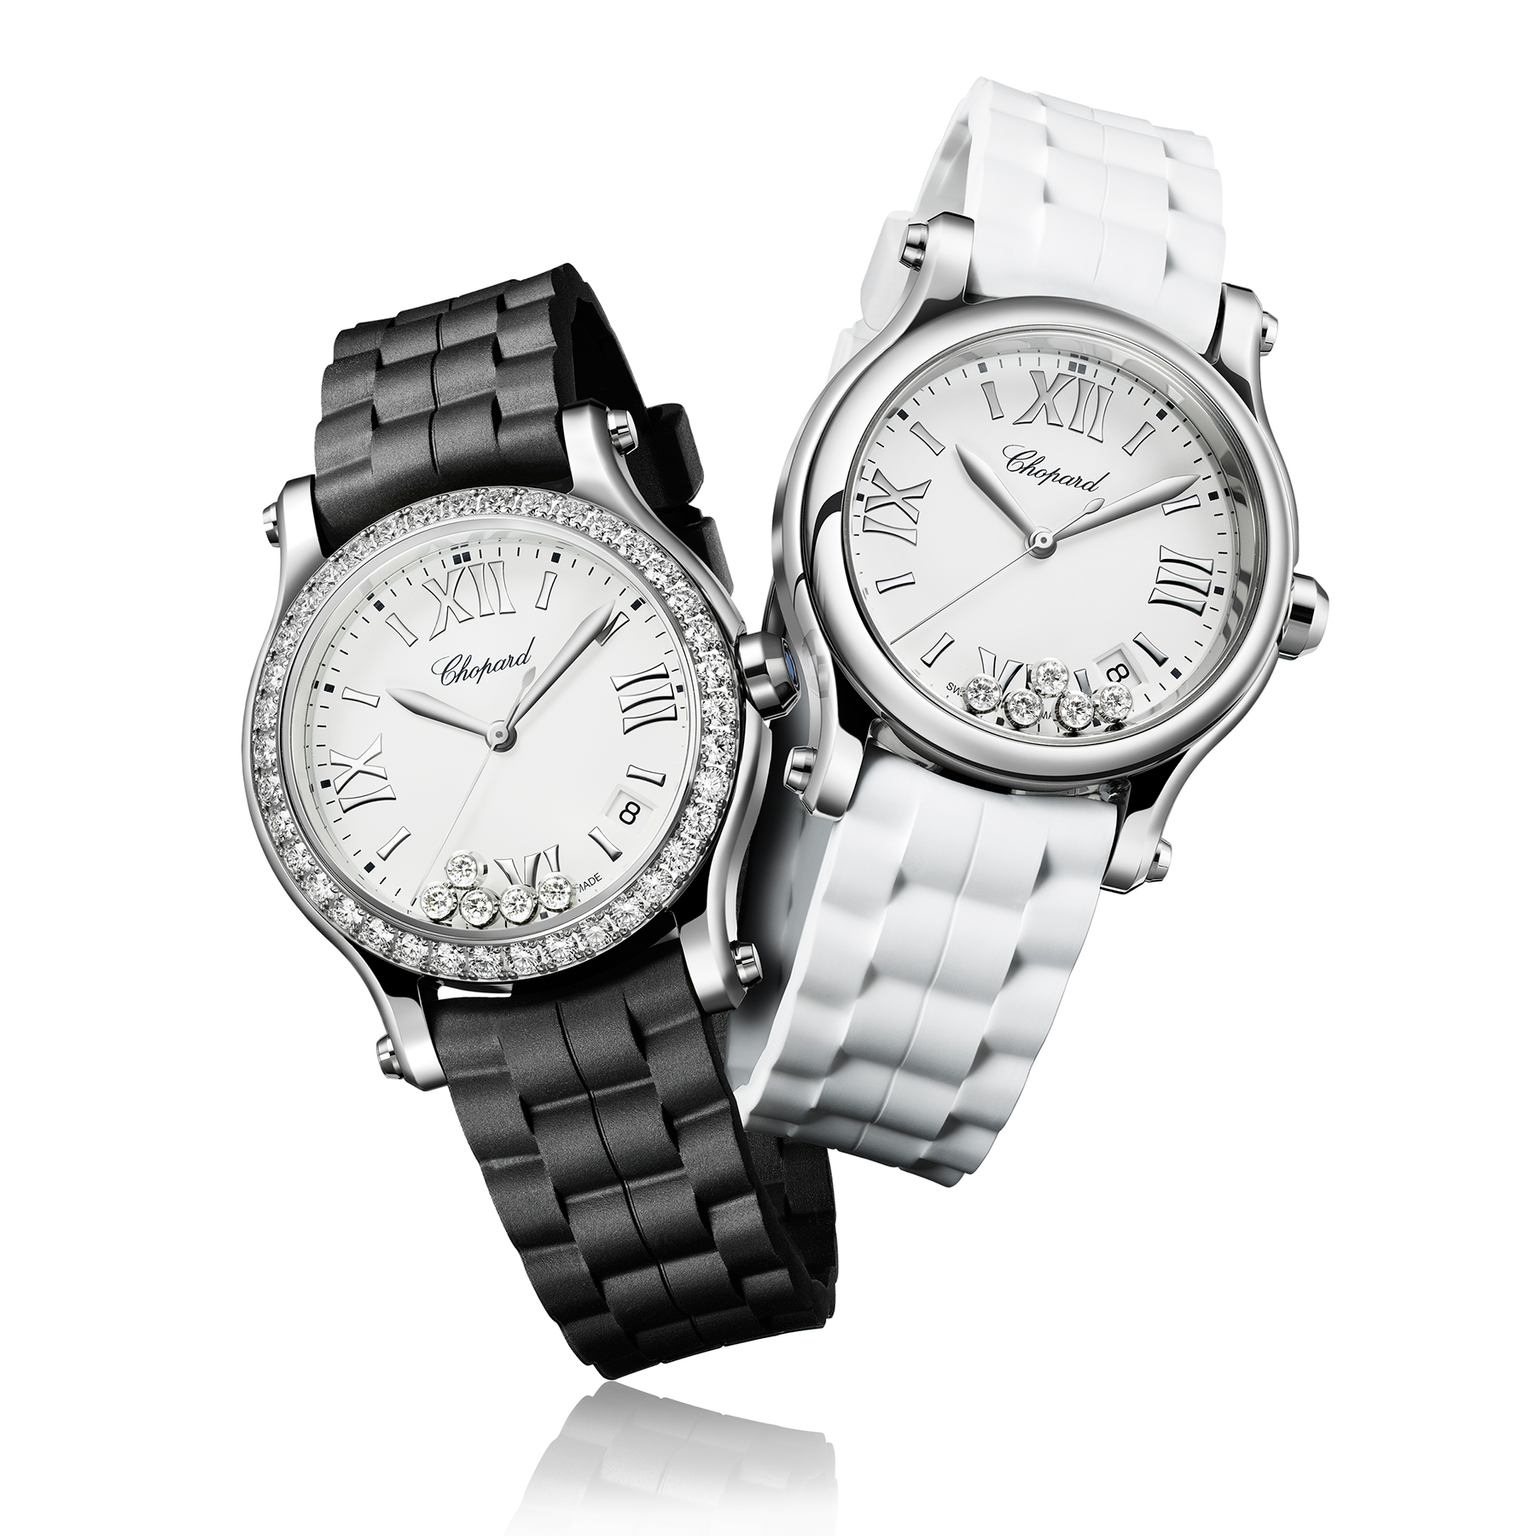 Chopard Happy Sport watches with interchangeable straps